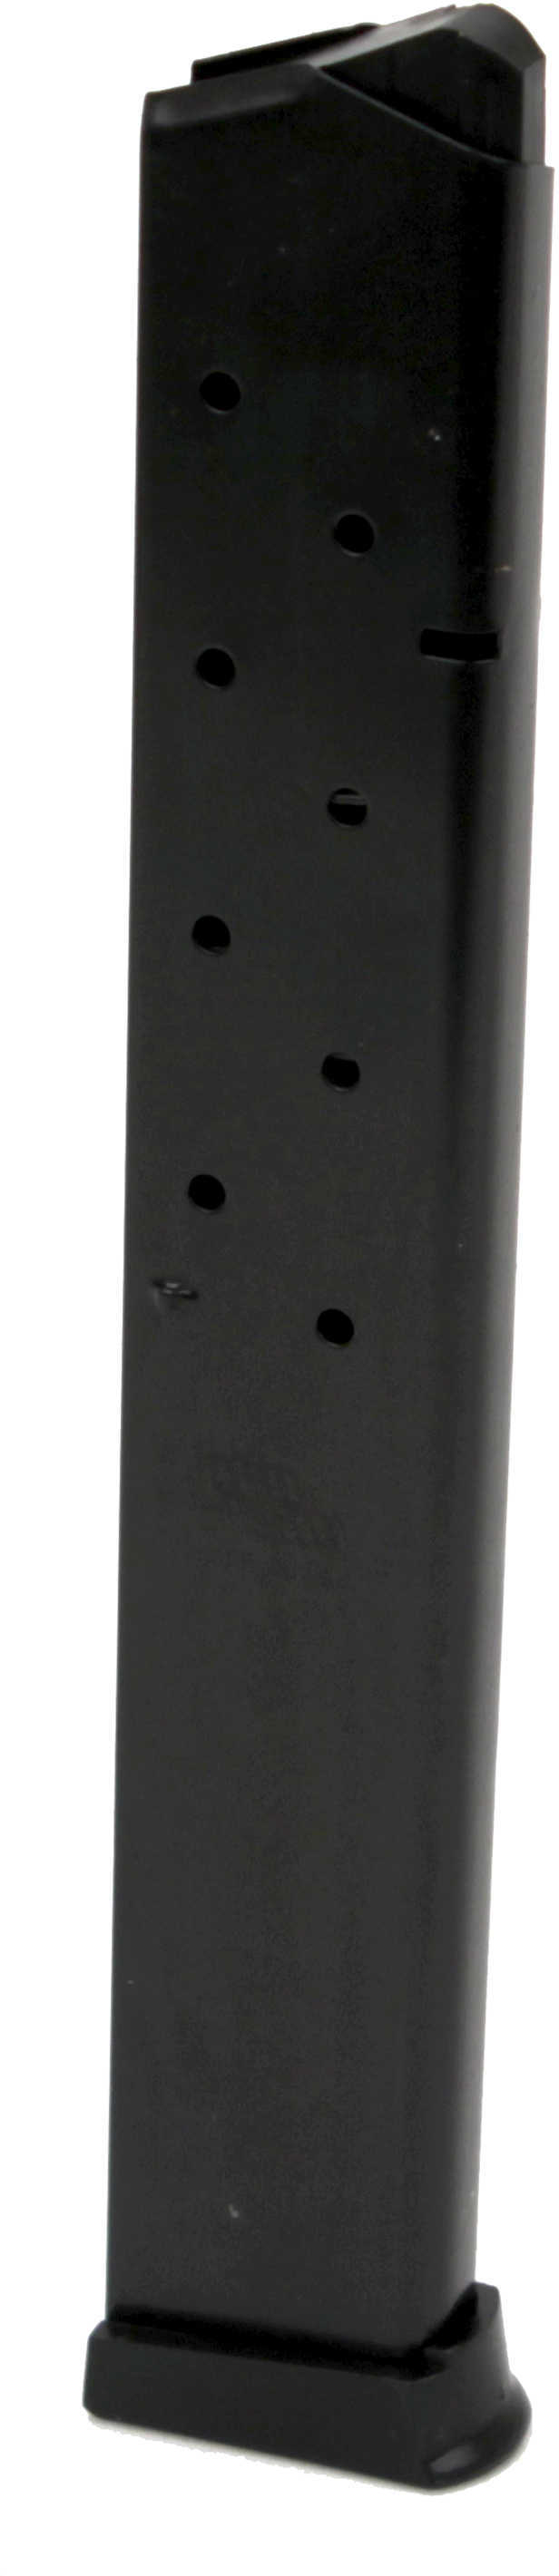 ProMag Ruger P90 High Capacity Magazine .45 ACP - 15 round Blue Easy loading Rugged carbon heat-tr RUGA2